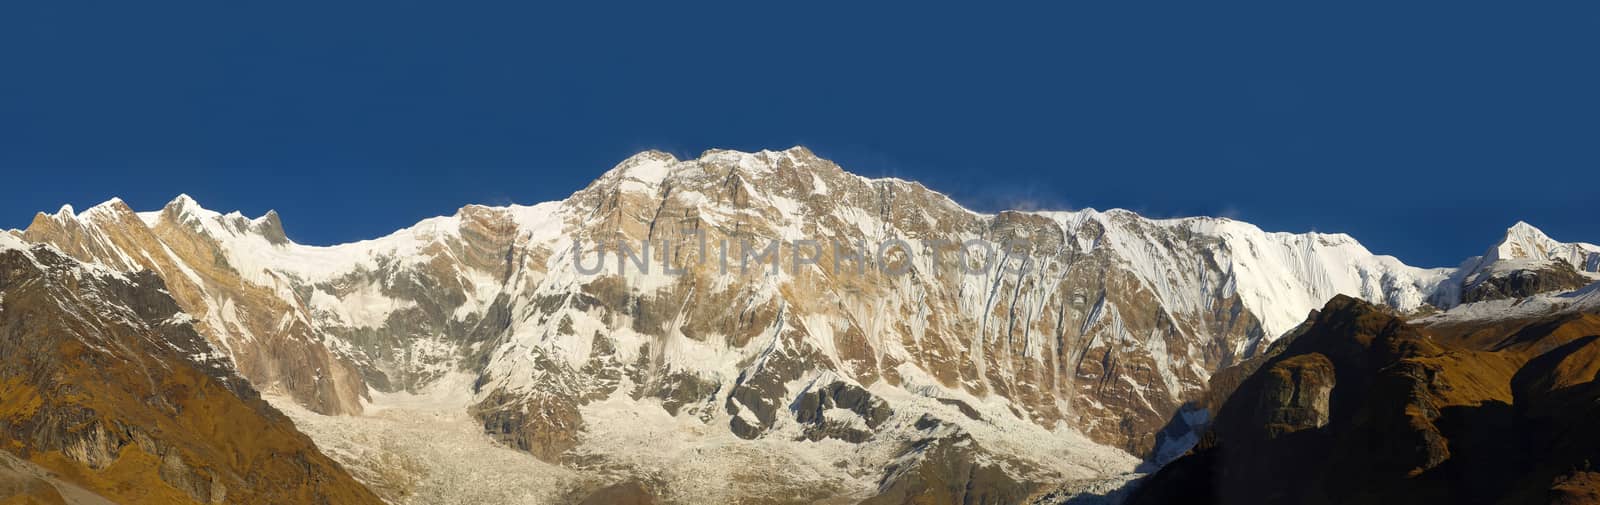 Panorama of the south face of Annapurna I Main Mountain on the background of sky in morning in the Himalayas
